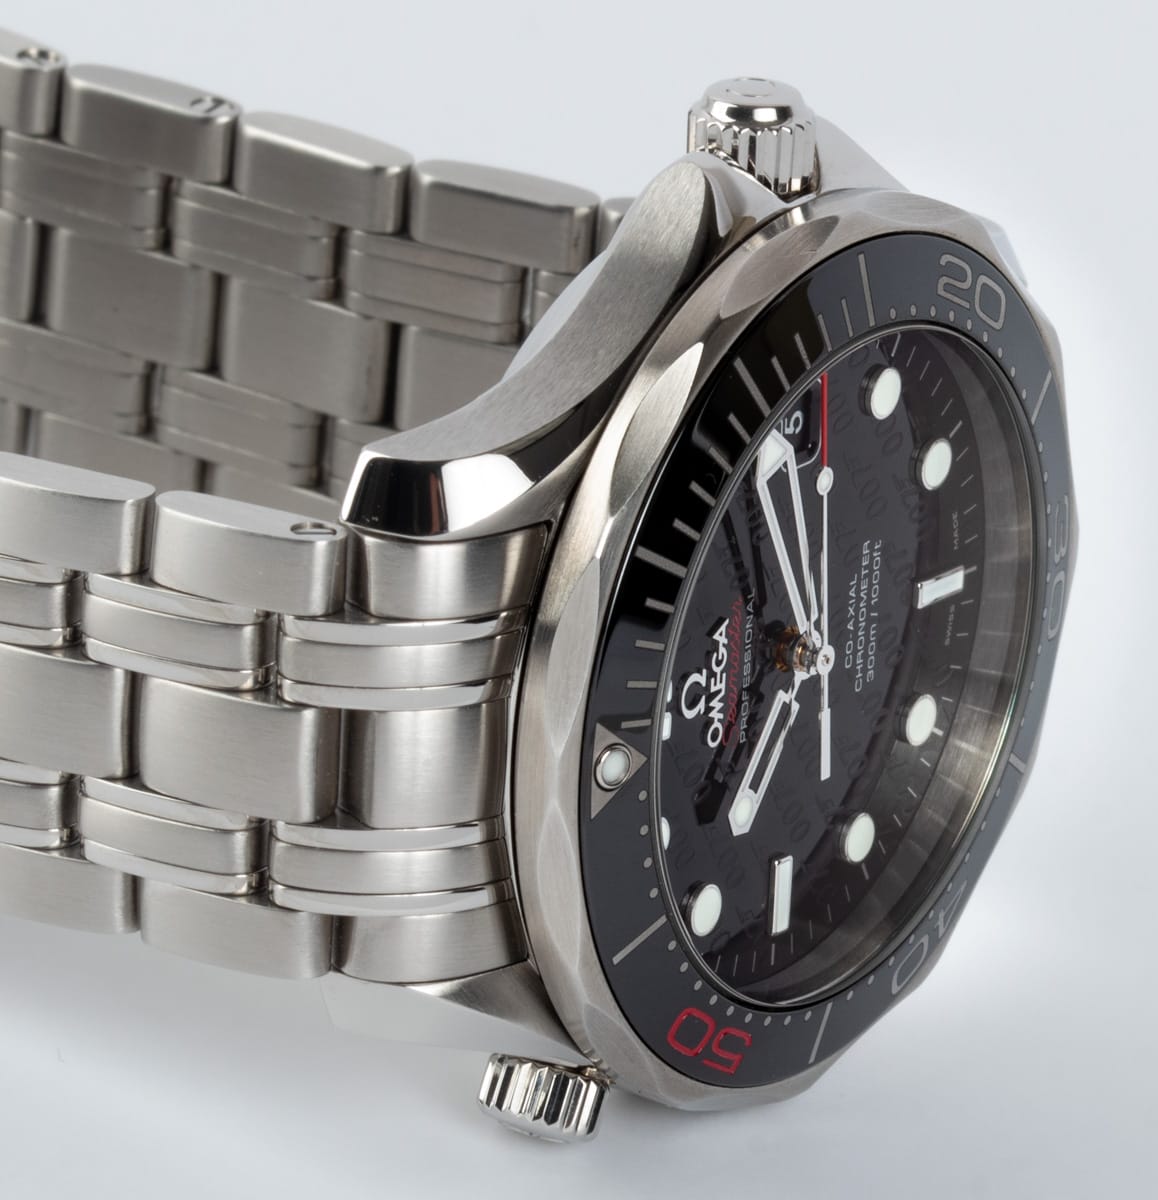 Dial Shot of Seamaster Professional James Bond 50th Anniversary Limited Edition